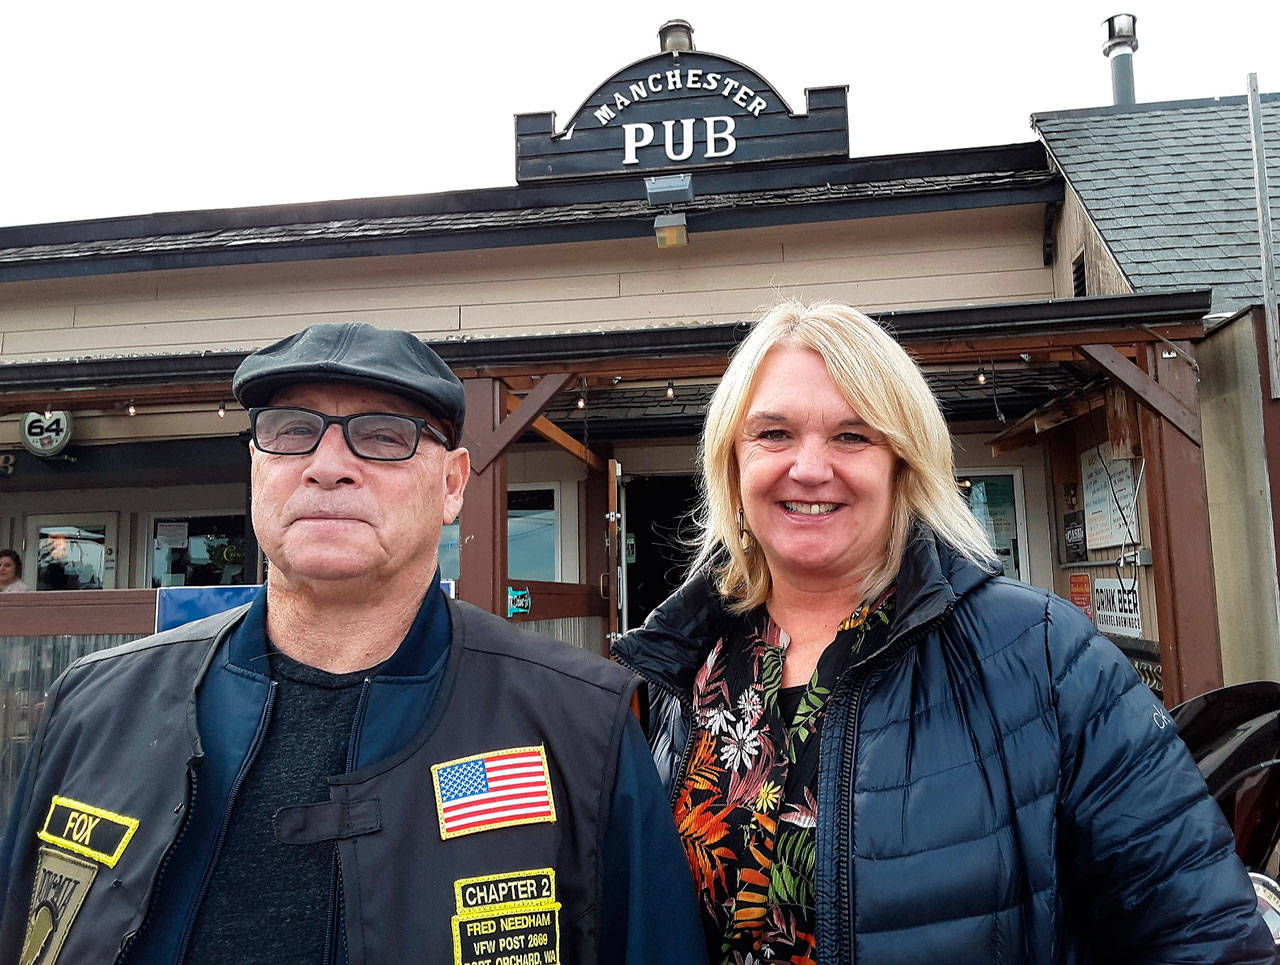 Gary and Becky Fox said they fell in love with the historic pub and bought it in 2007. (Jana Mackin photo)